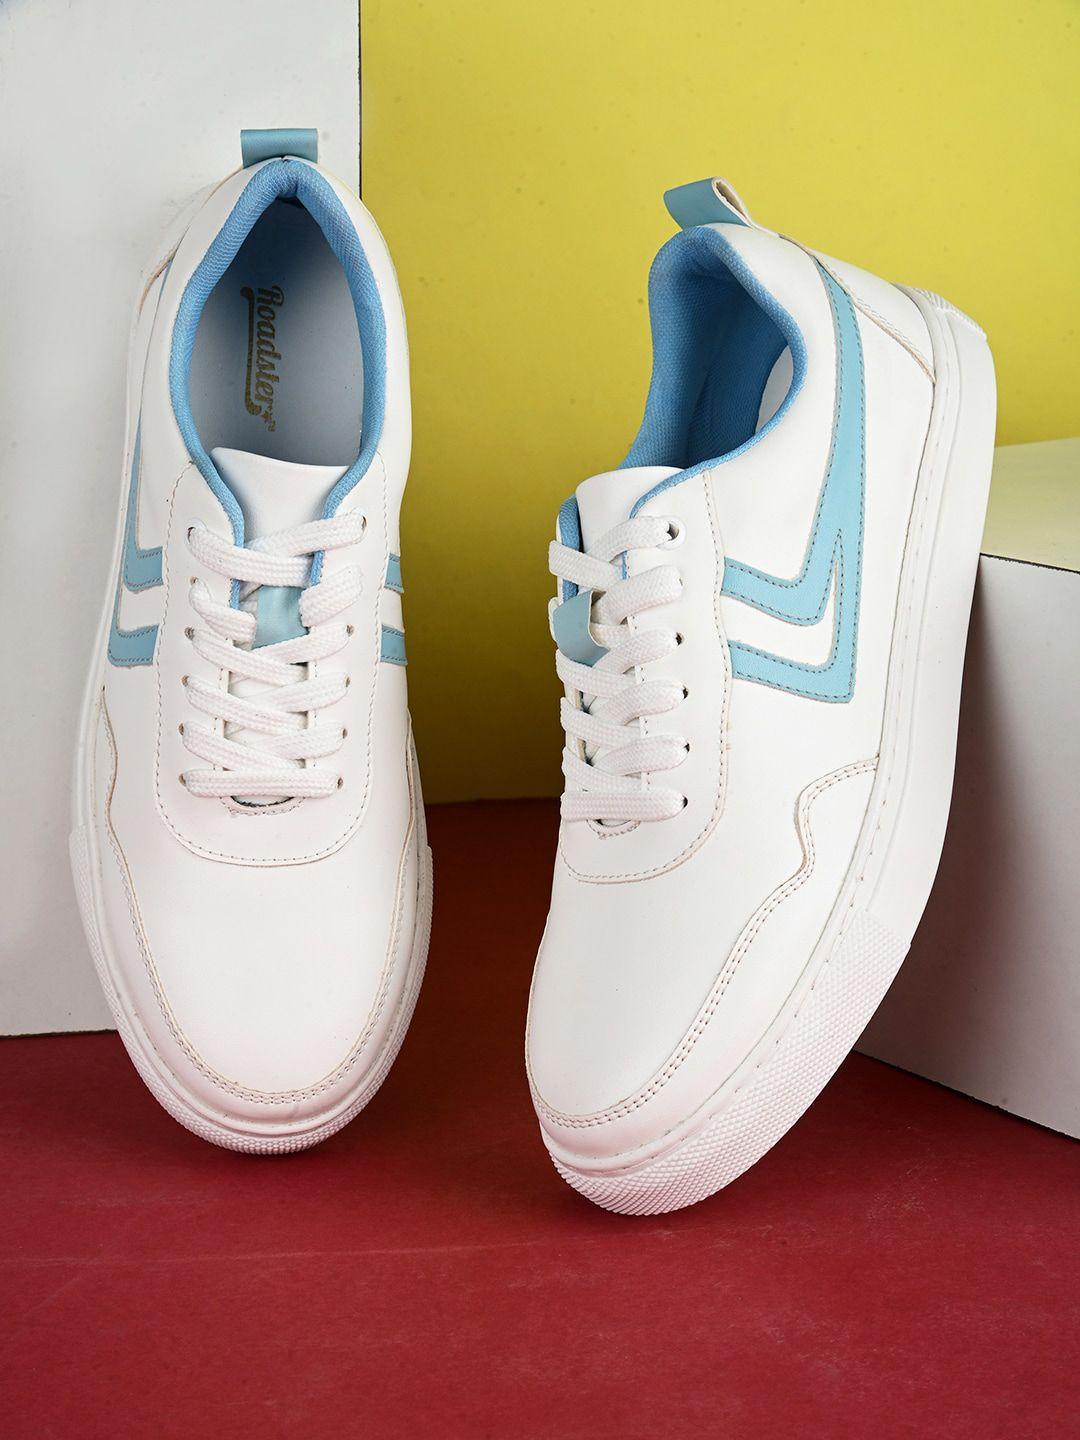 the-roadster-lifestyle-co.-women-white-and-blue-lightweight-sneakers